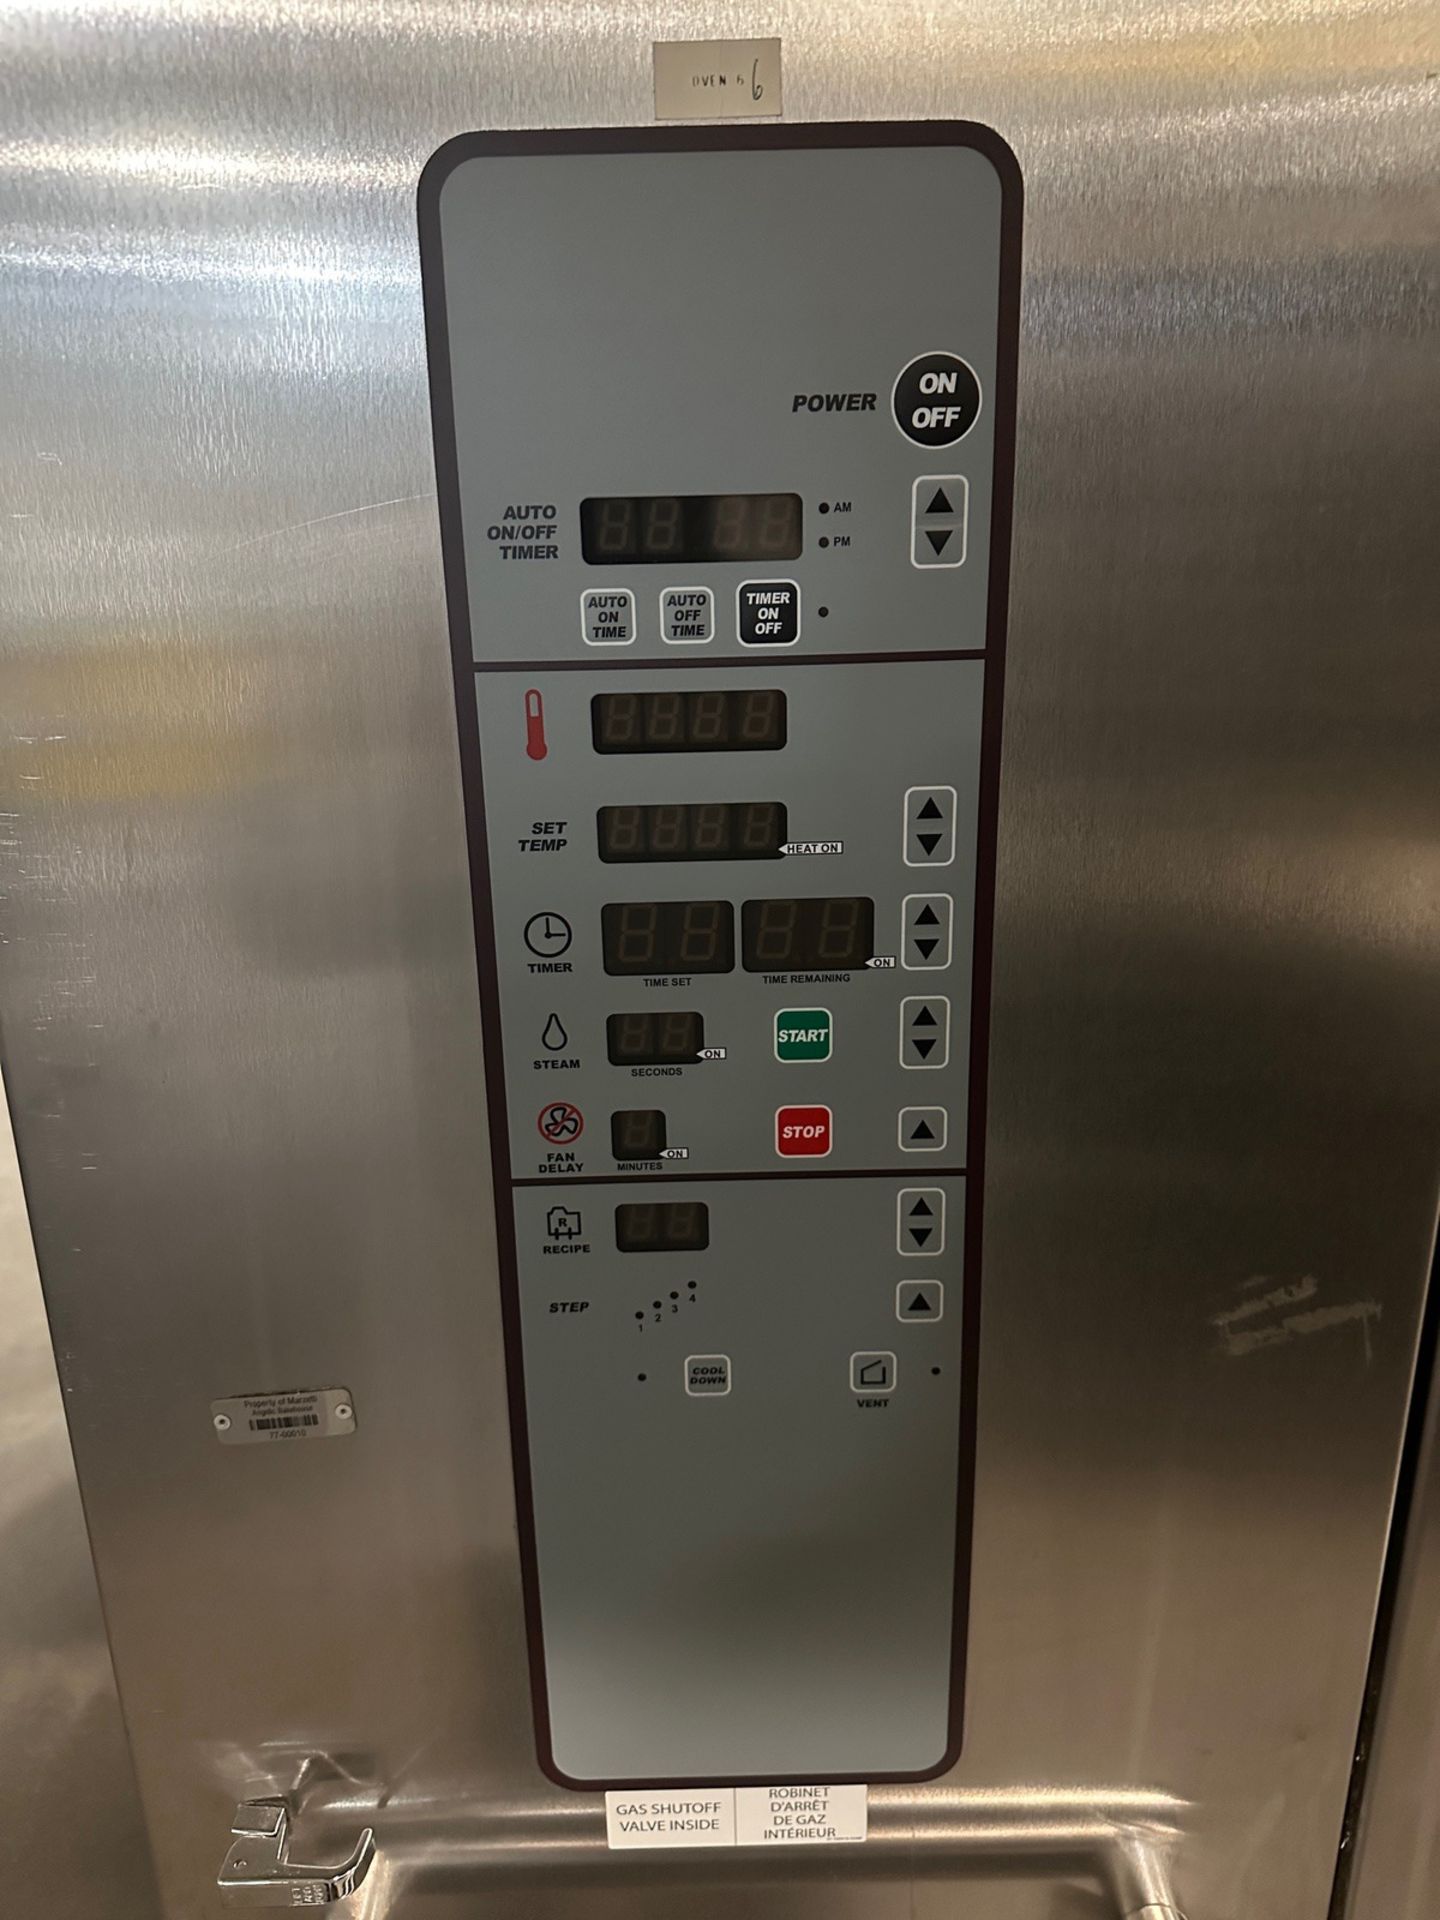 2022 Baxter Rotating Double Rack Oven - Model OV500G2-EE, S/N 24-2040826 | Rig Fee $900 - Image 3 of 4